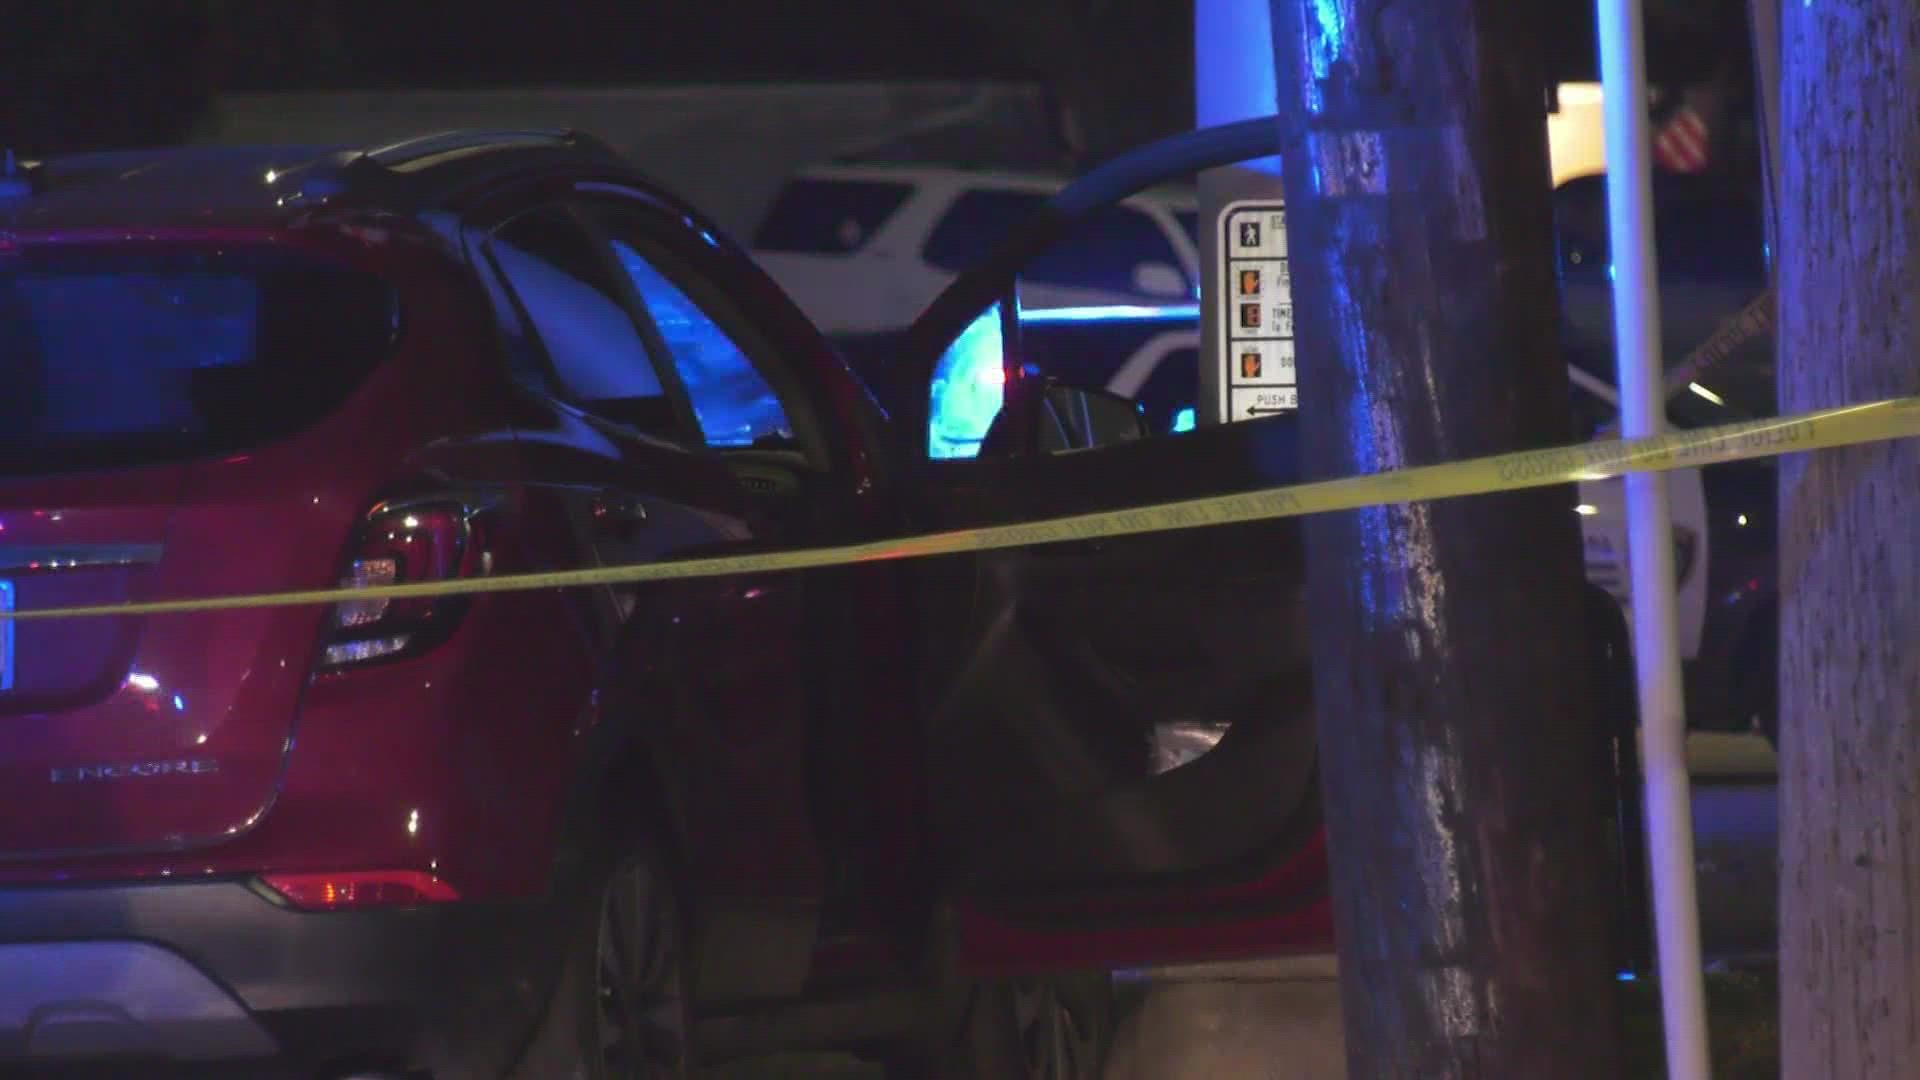 Houston police are investigating after a man with several gunshot wounds crashed his vehicle Friday night in the Sharpstown area and later died.